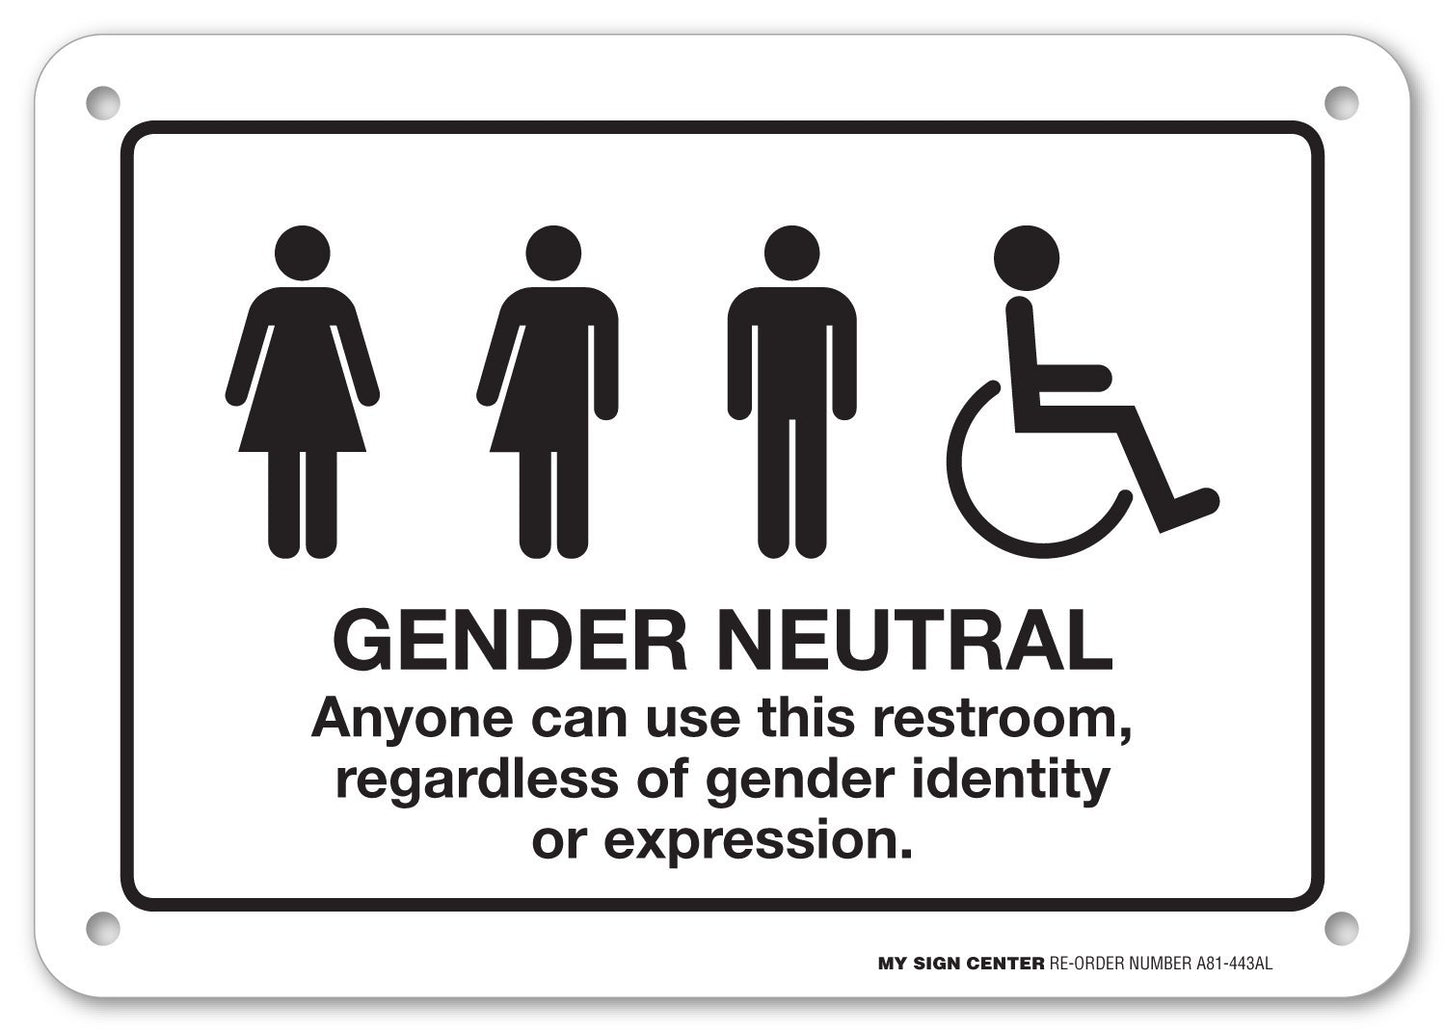 Gender Neutral Anyone Can Use This Restroom, Regardless of Gender Identity or Expression Sign